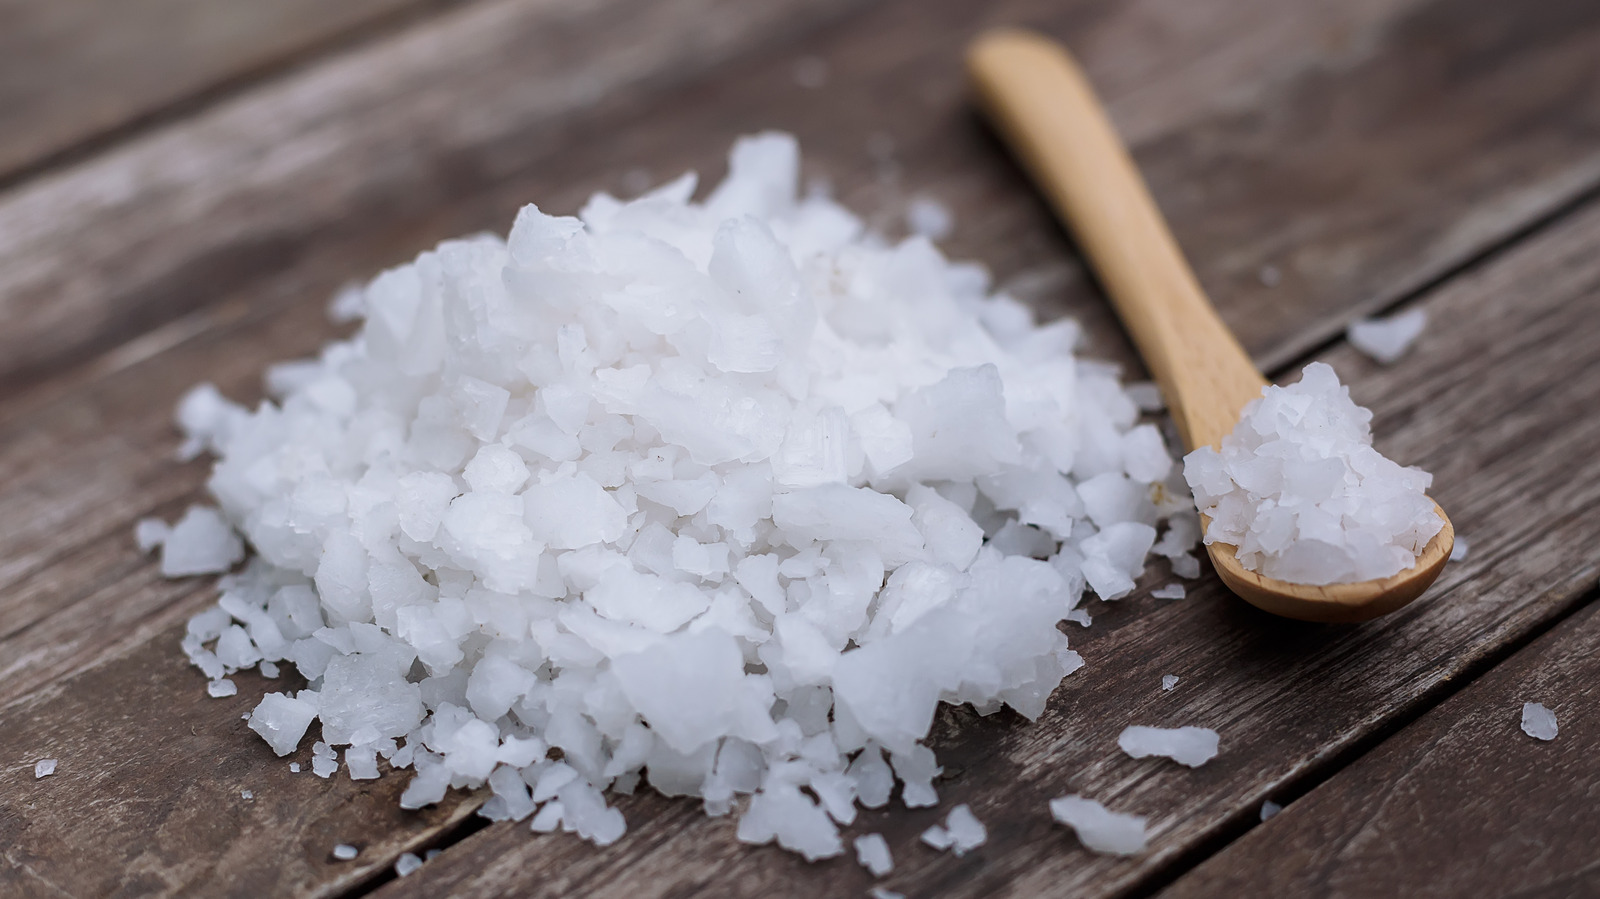 What Is Fleur De Sel And Why Is It Special?